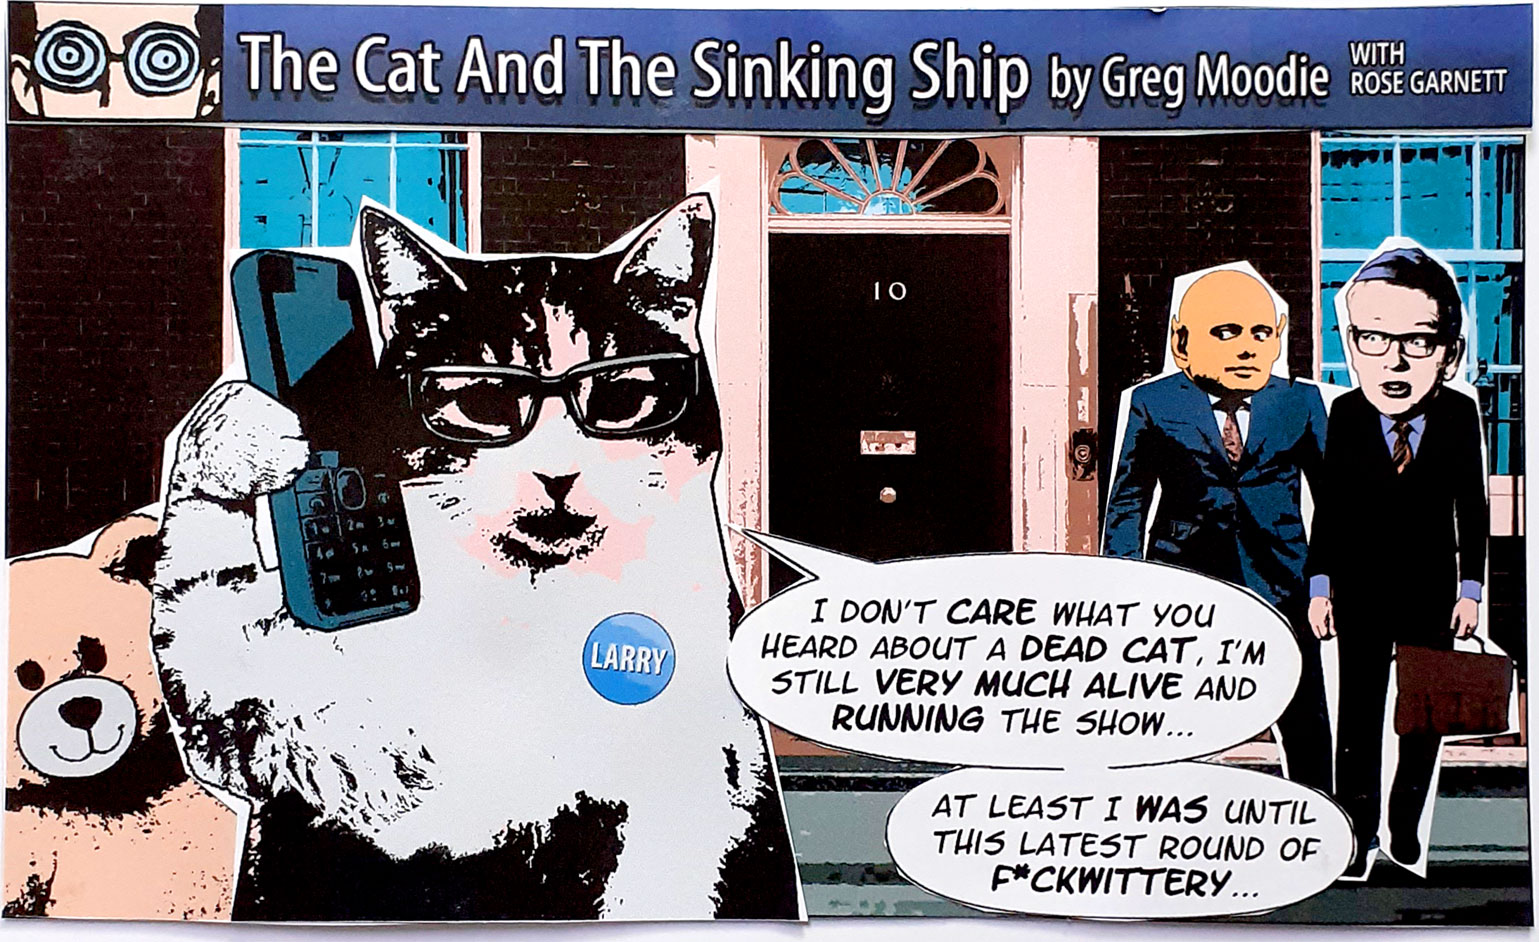 The Cat And The Sinking Ship